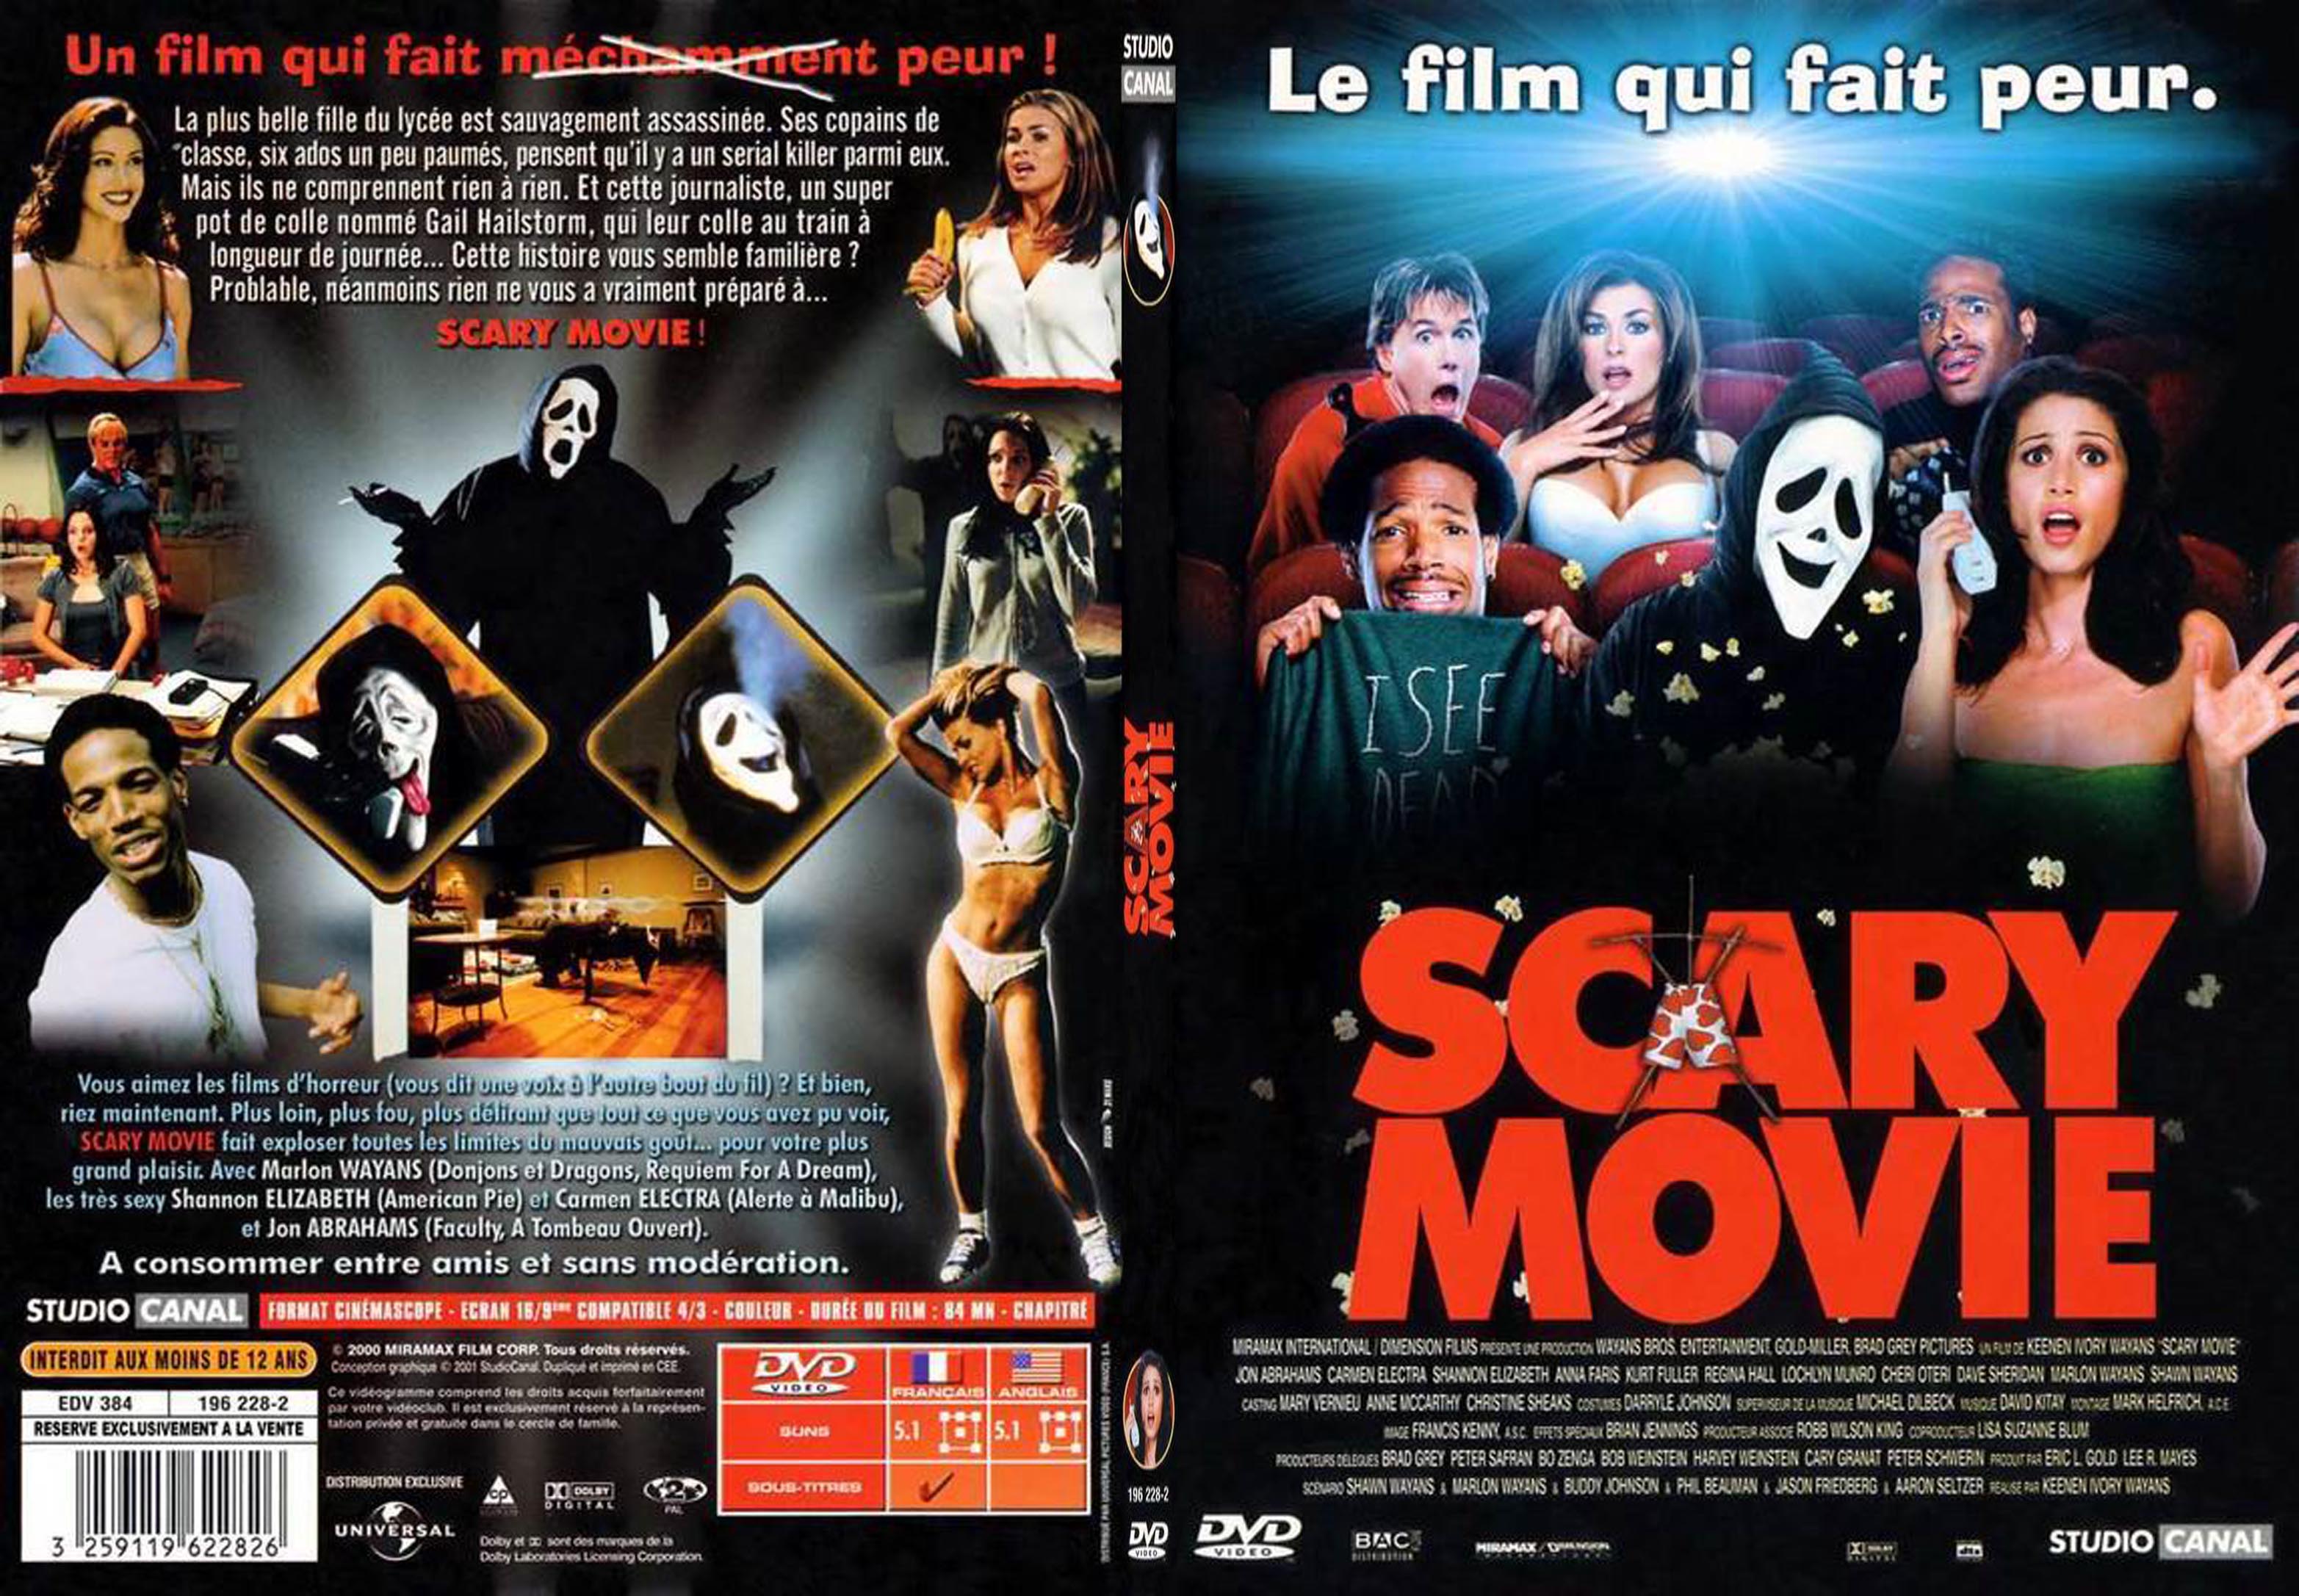 Jaquette DVD Scary Movie - SLIM